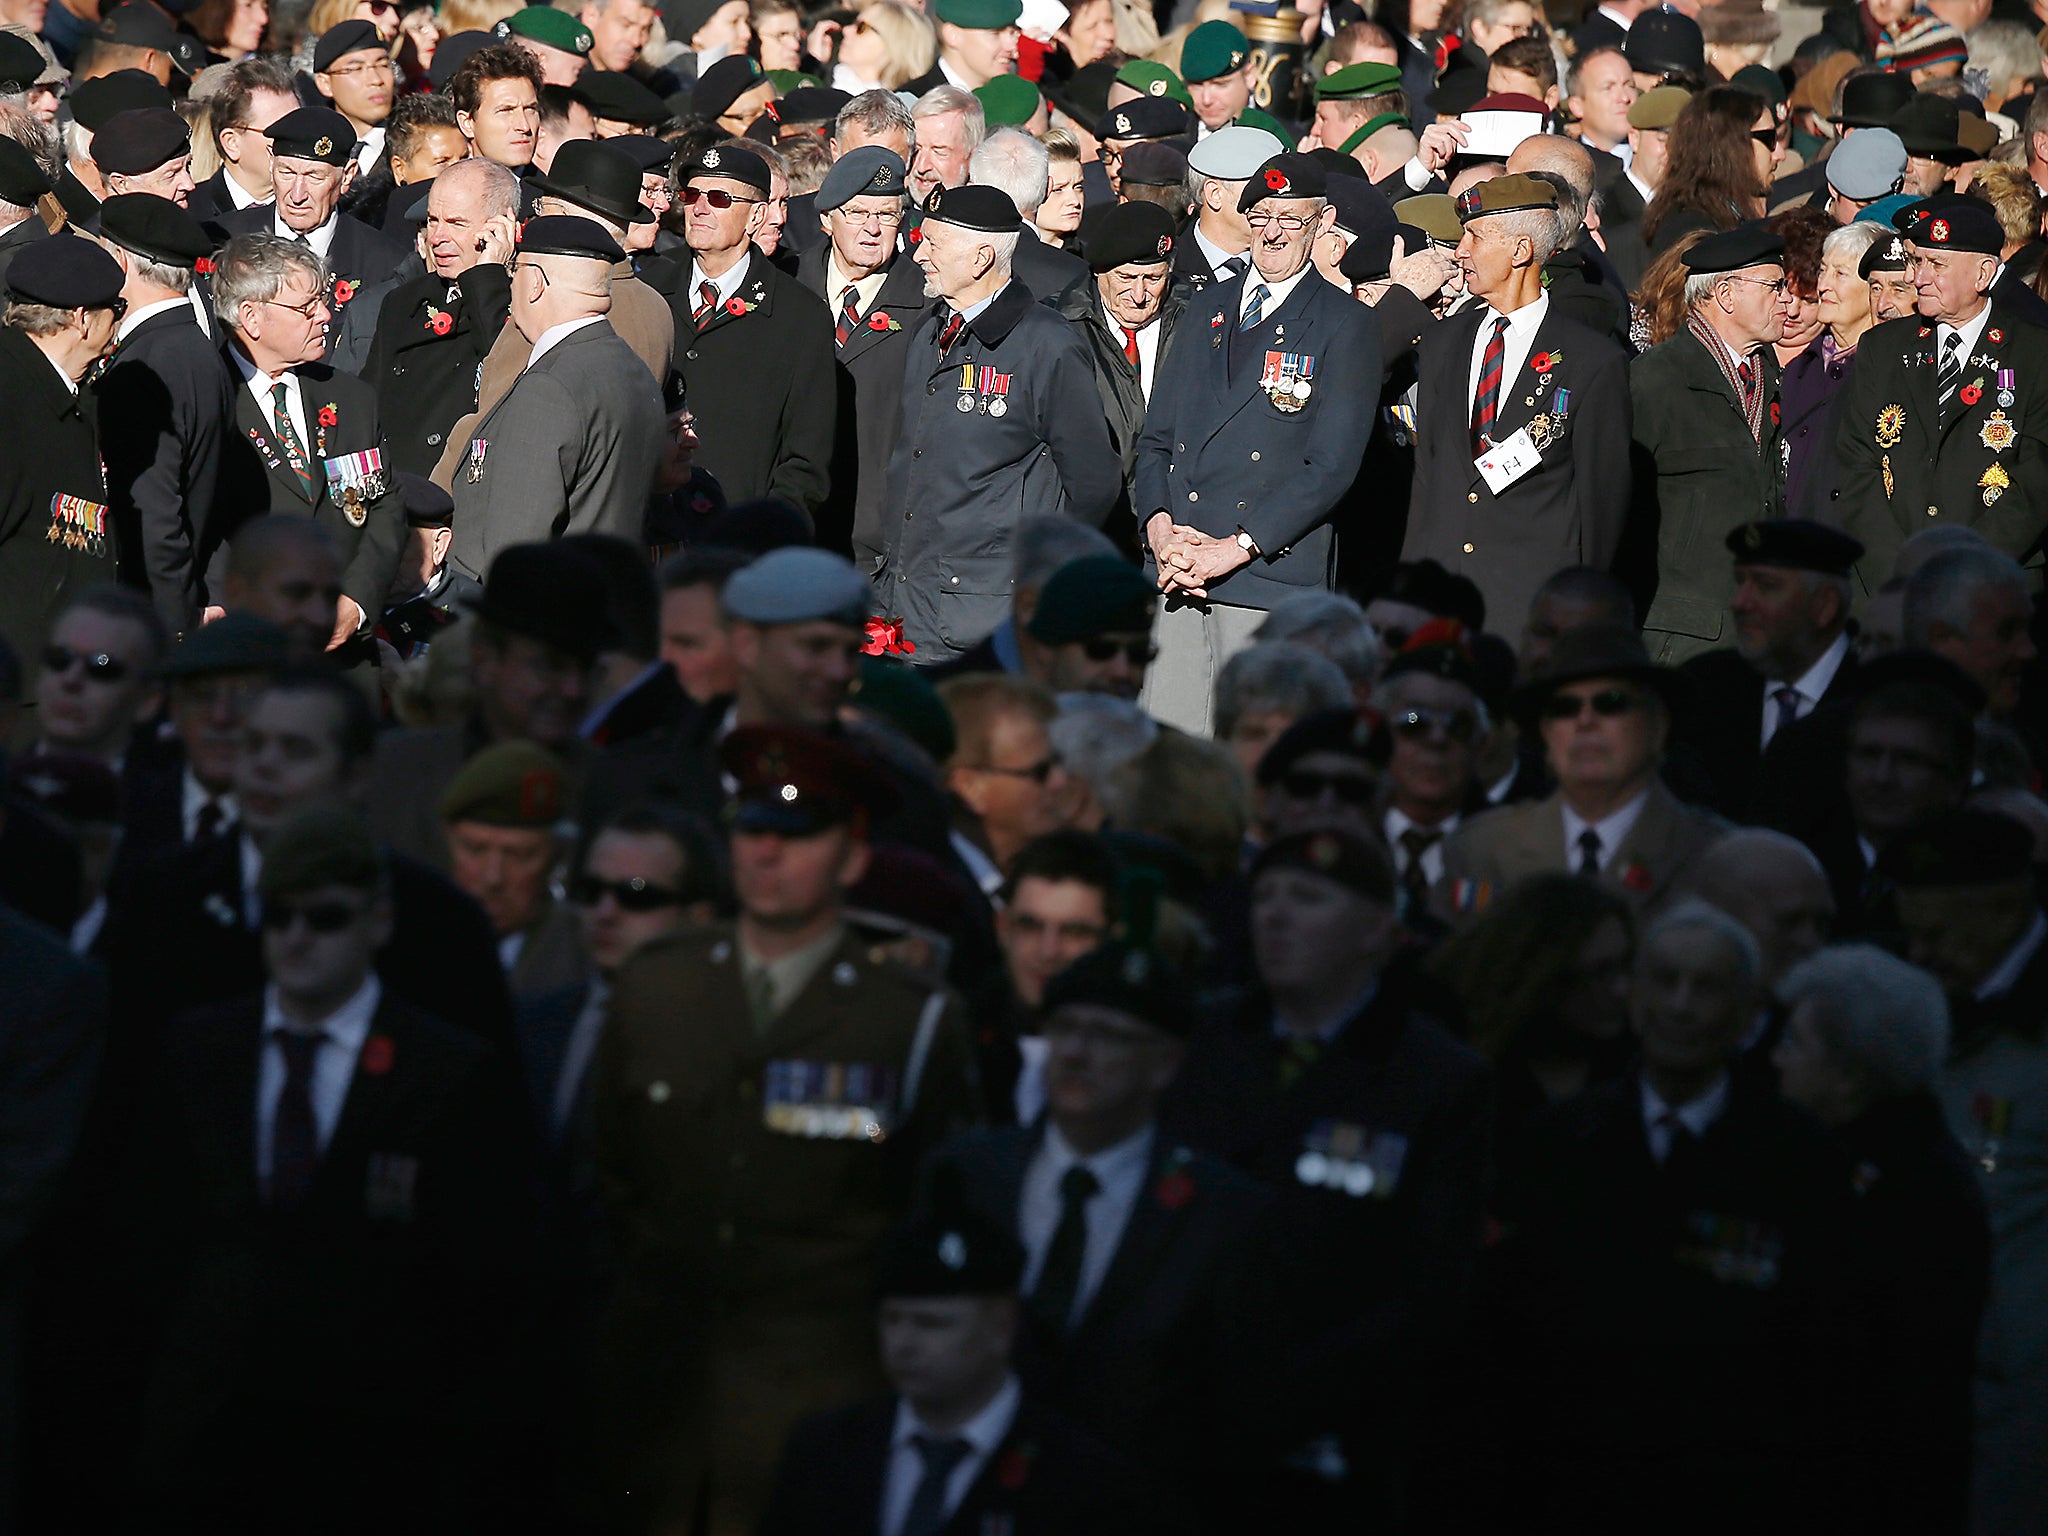 Servicemen and women gather during the parade on Whitehall close to the Cenotaph during Remembrance Sunday